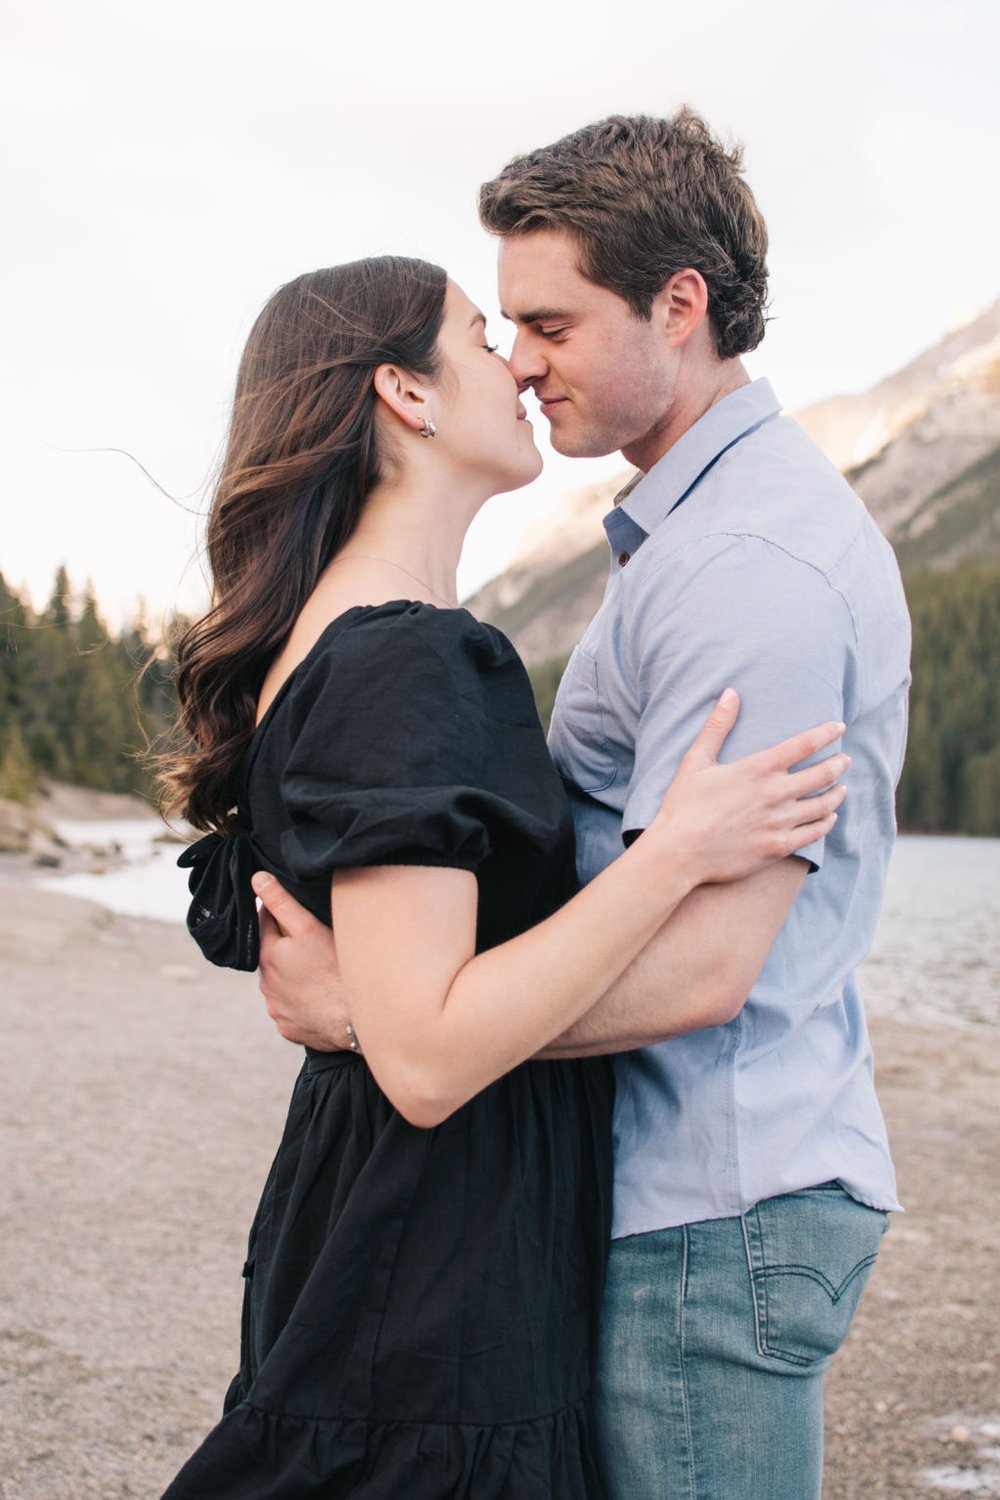 Romantic destination engagement session in Canada's Banff National Park photographed by Toronto Wedding Photographers, Ugo Photography